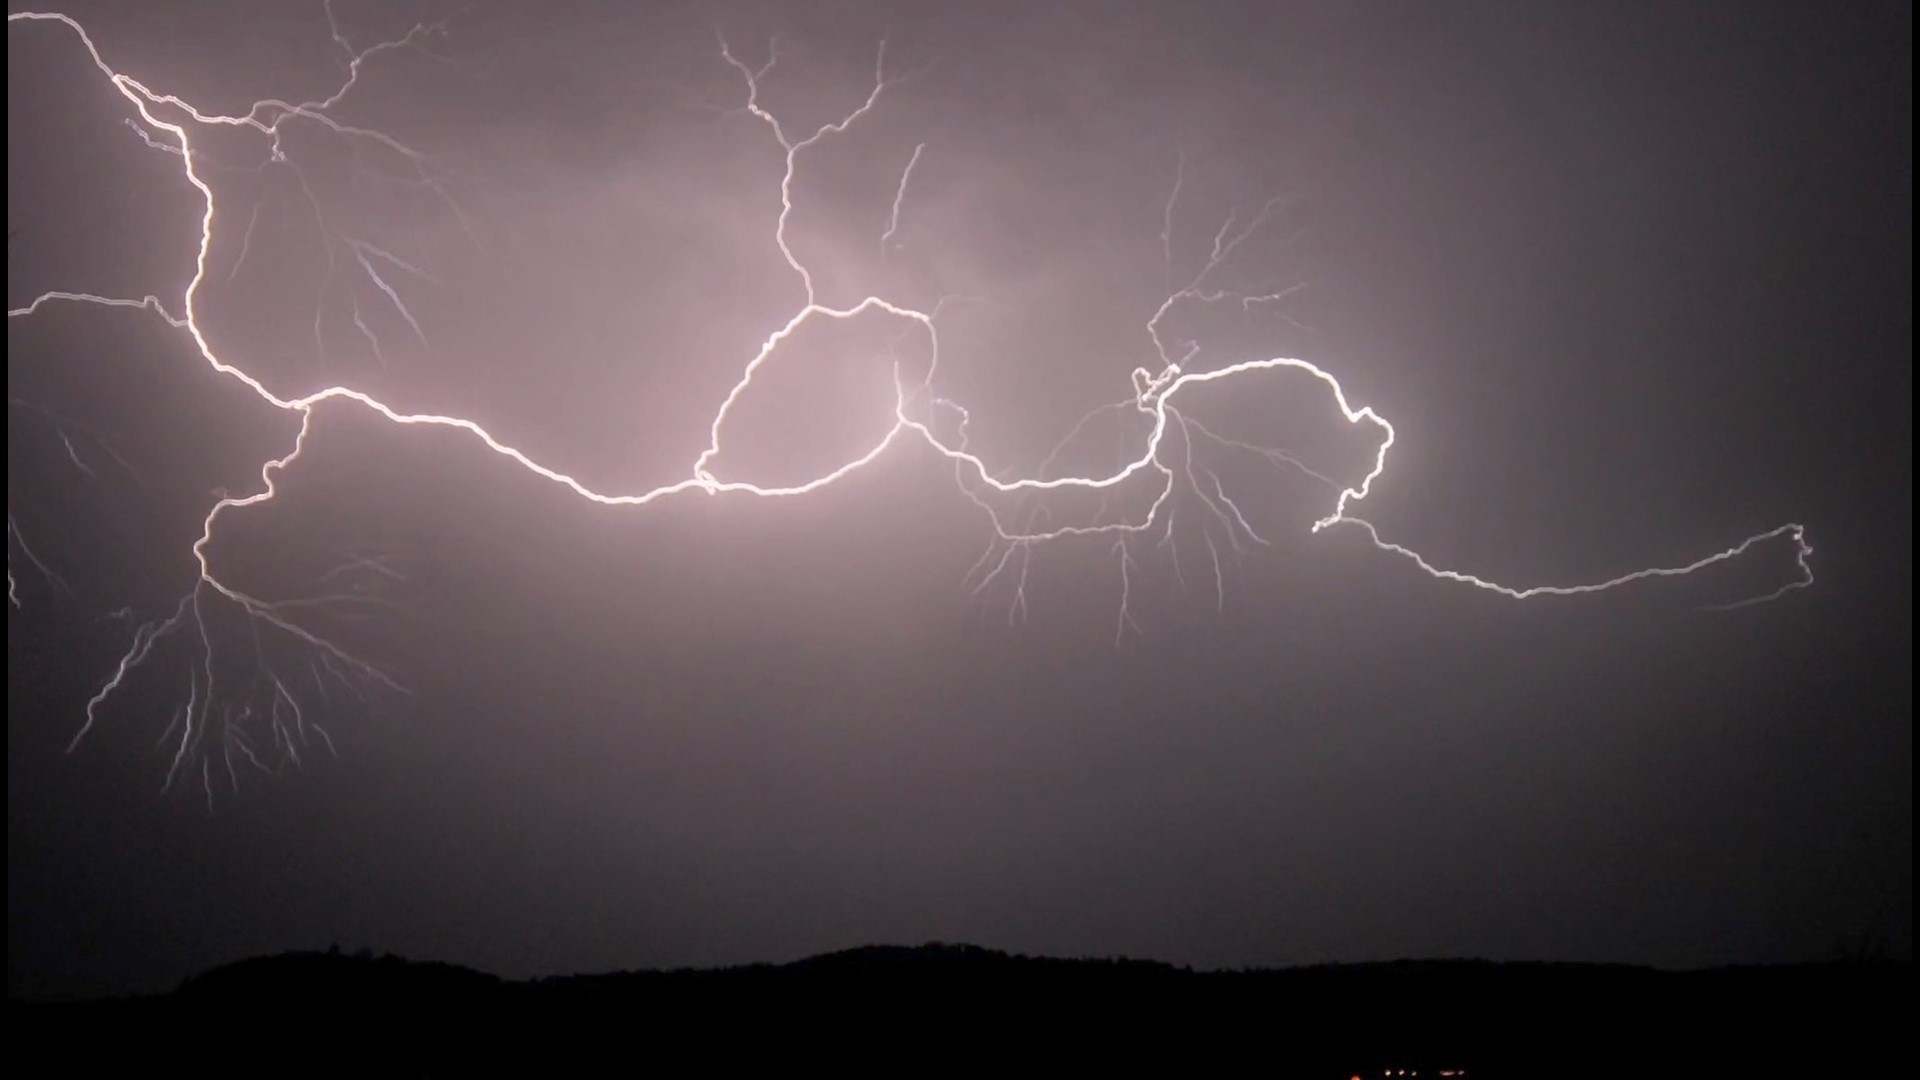 The odds of getting struck by lightning are literally less than one in a million, yet you could increase your risk while doing seemingly innocent activities. Veuer's Maria Mercedes Galuppo has the story.